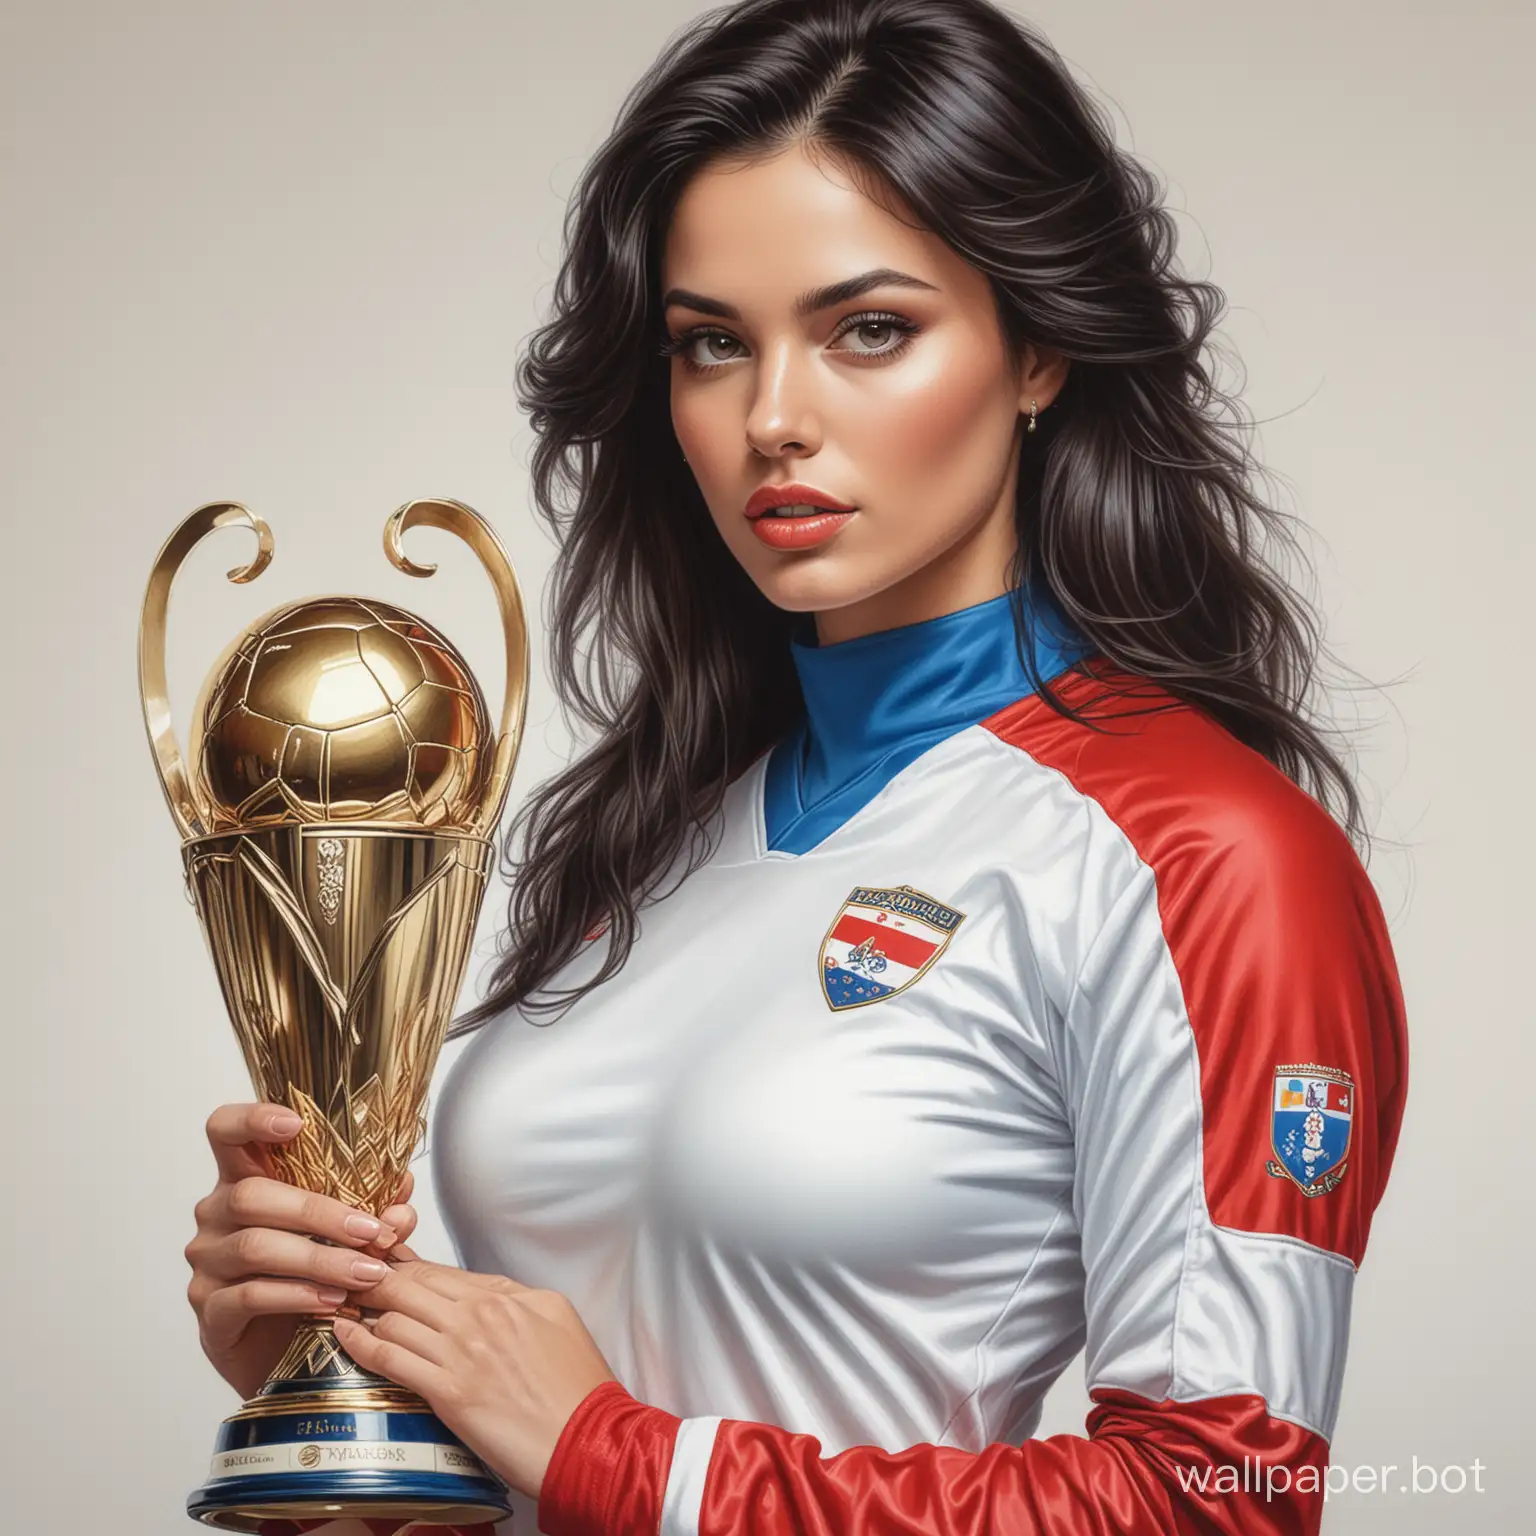 DarkHaired-Woman-in-Football-Uniform-Holding-Champions-Cup-Realistic-Colored-Pencil-Drawing